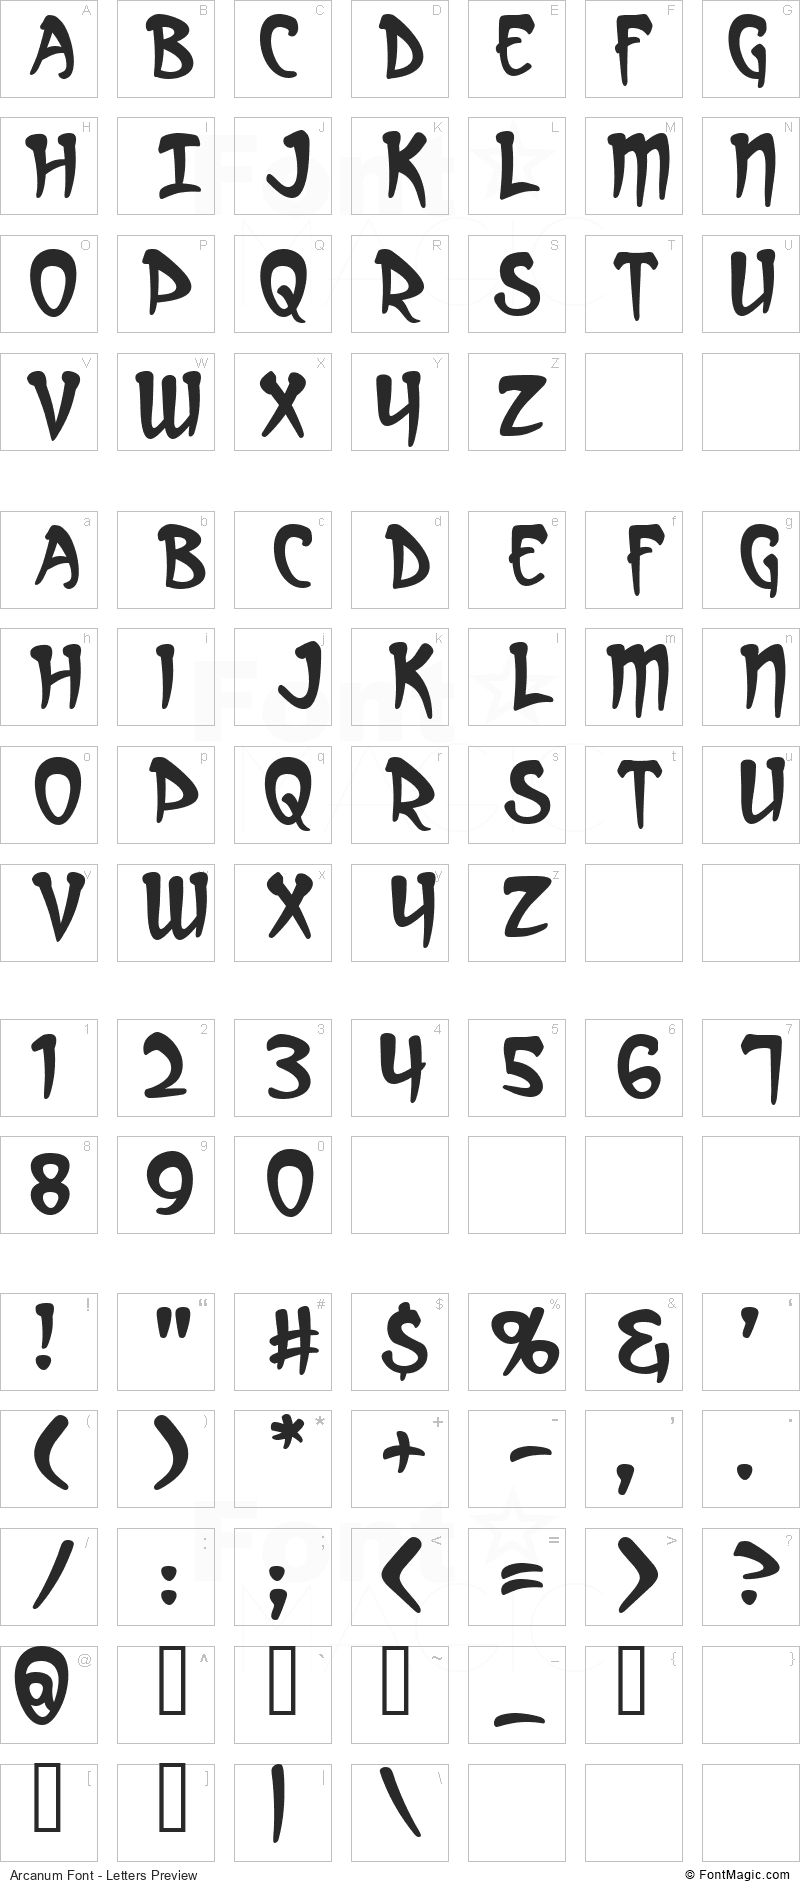 Arcanum Font - All Latters Preview Chart